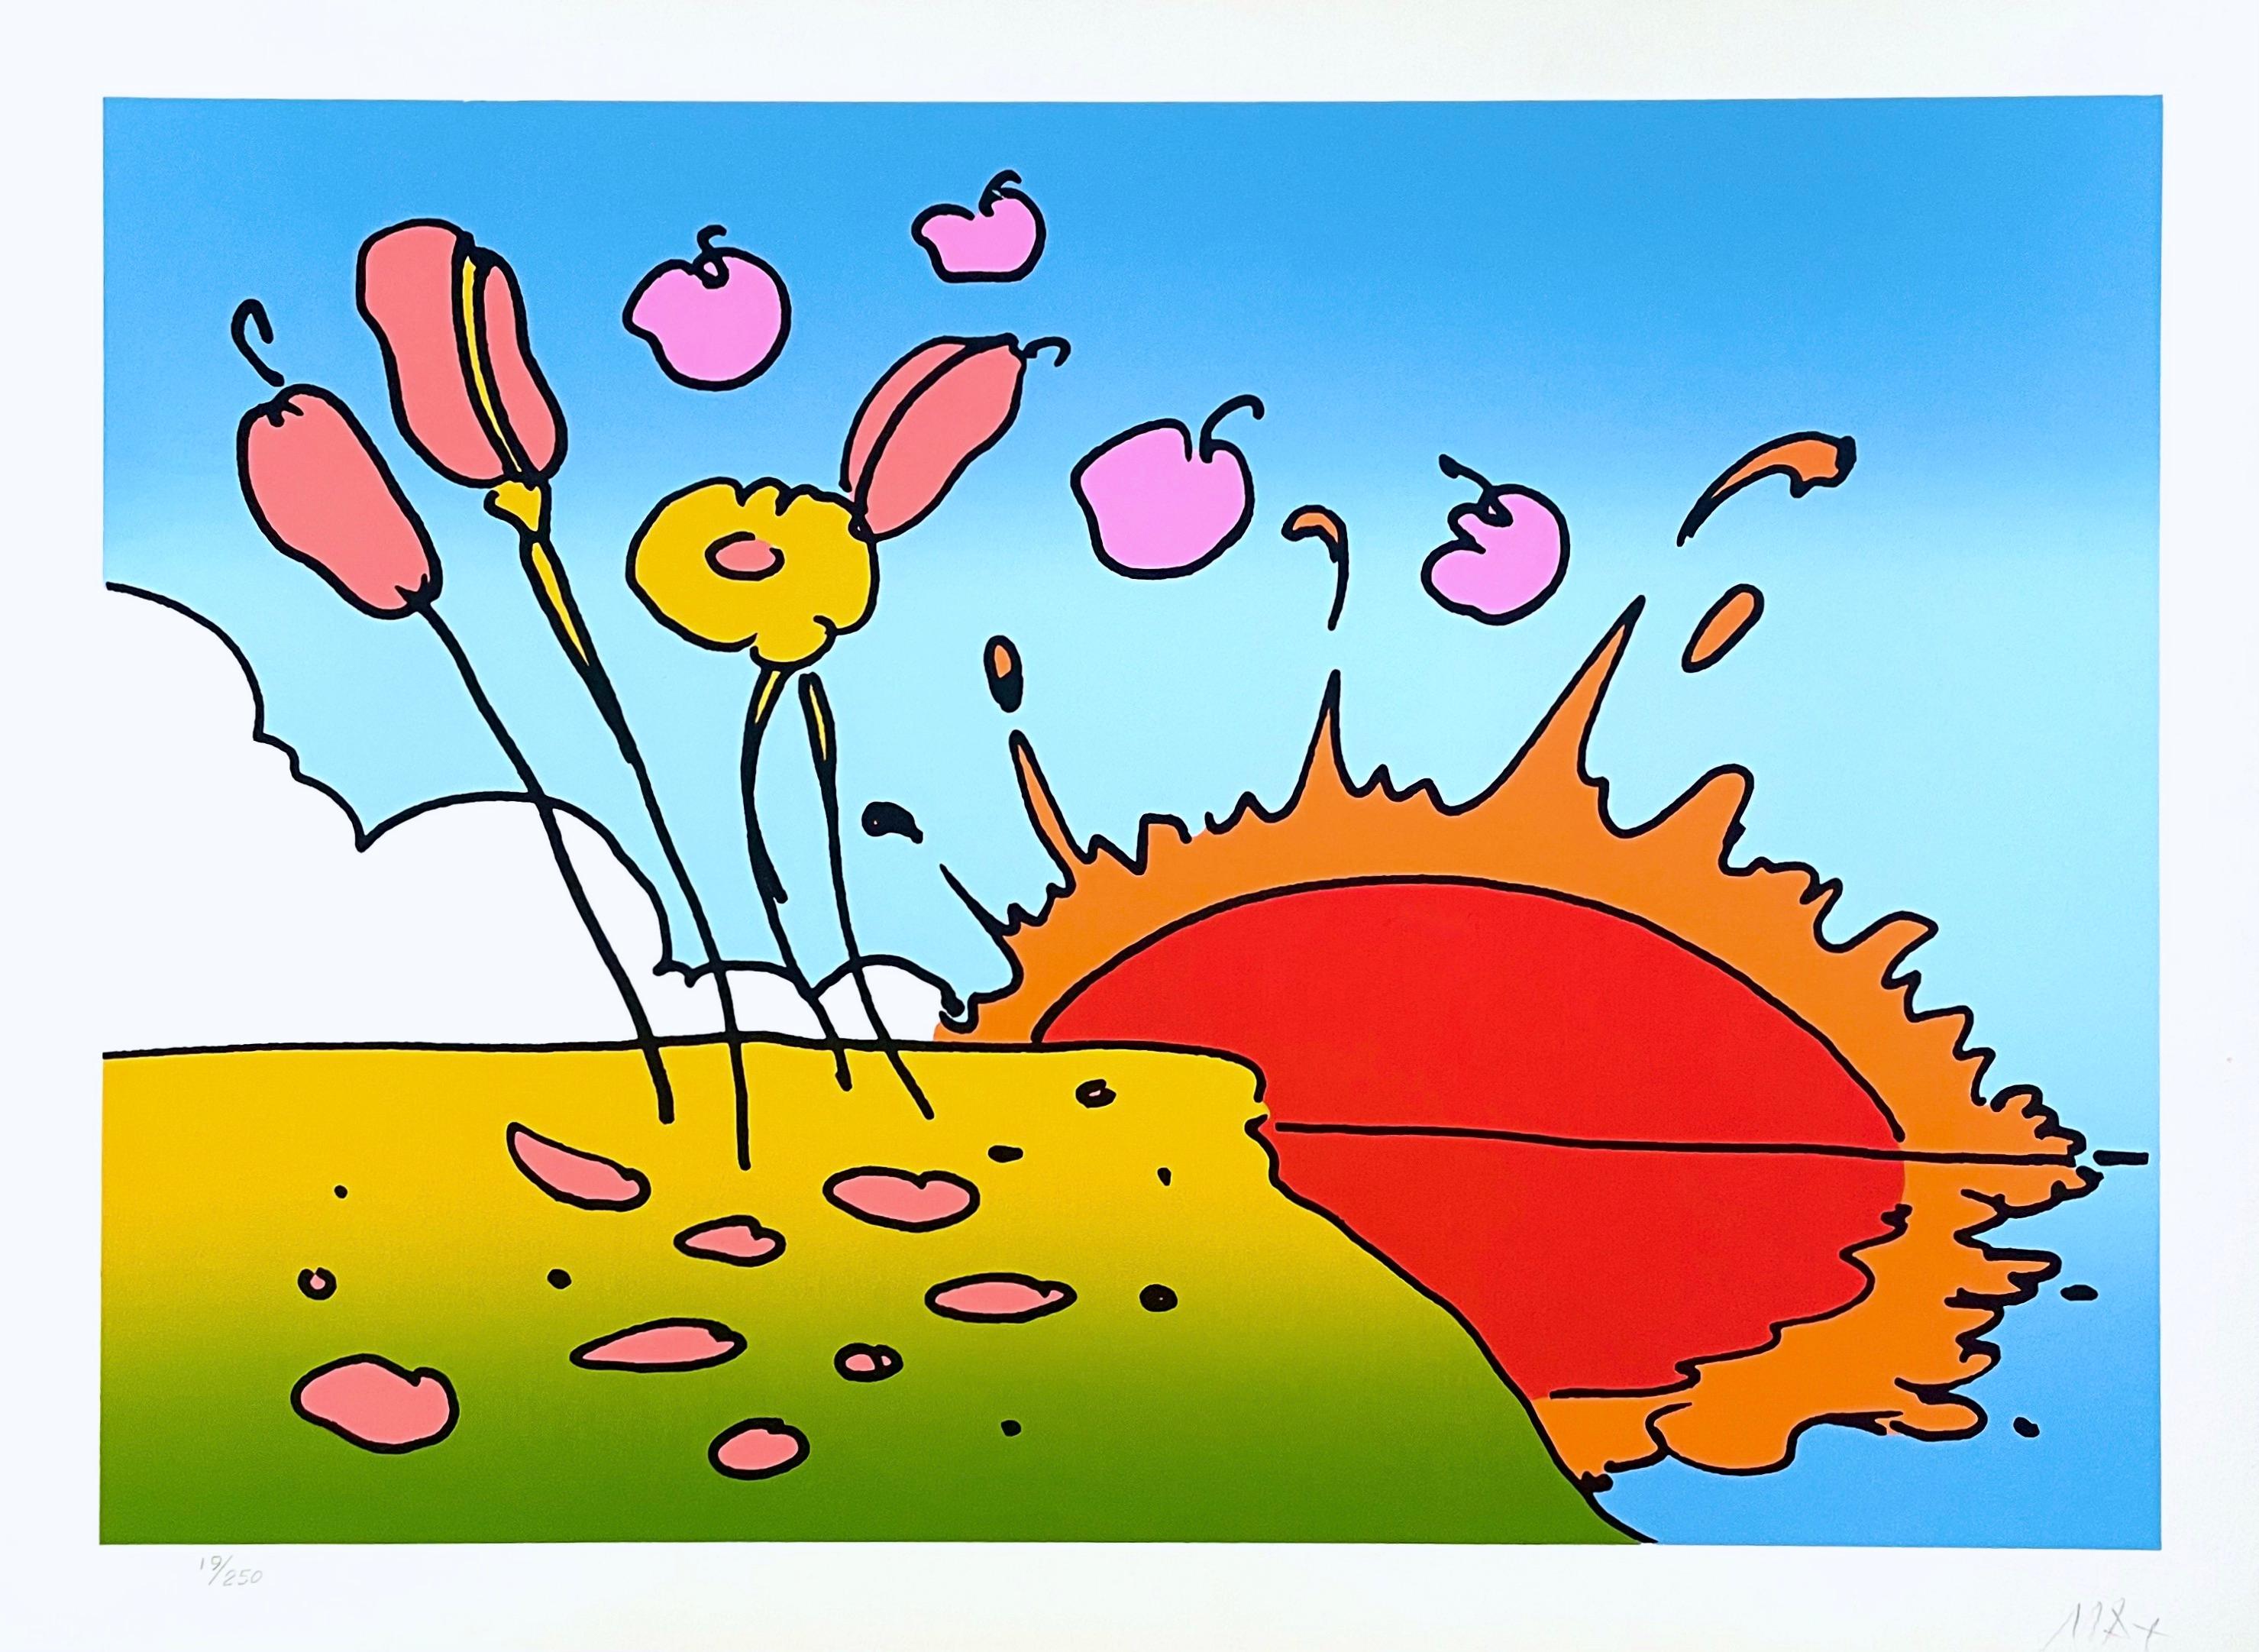 Artist: Peter Max (1937)
Title: Space Landscape
Year: 1978
Edition: 300, plus proofs
Medium: Silkscreen on Fabriano Rosapina
Size: 18.75 x 26.75 inches
Condition: Excellent
Inscription: Signed and numbered by the artist.
Notes: Published by Via